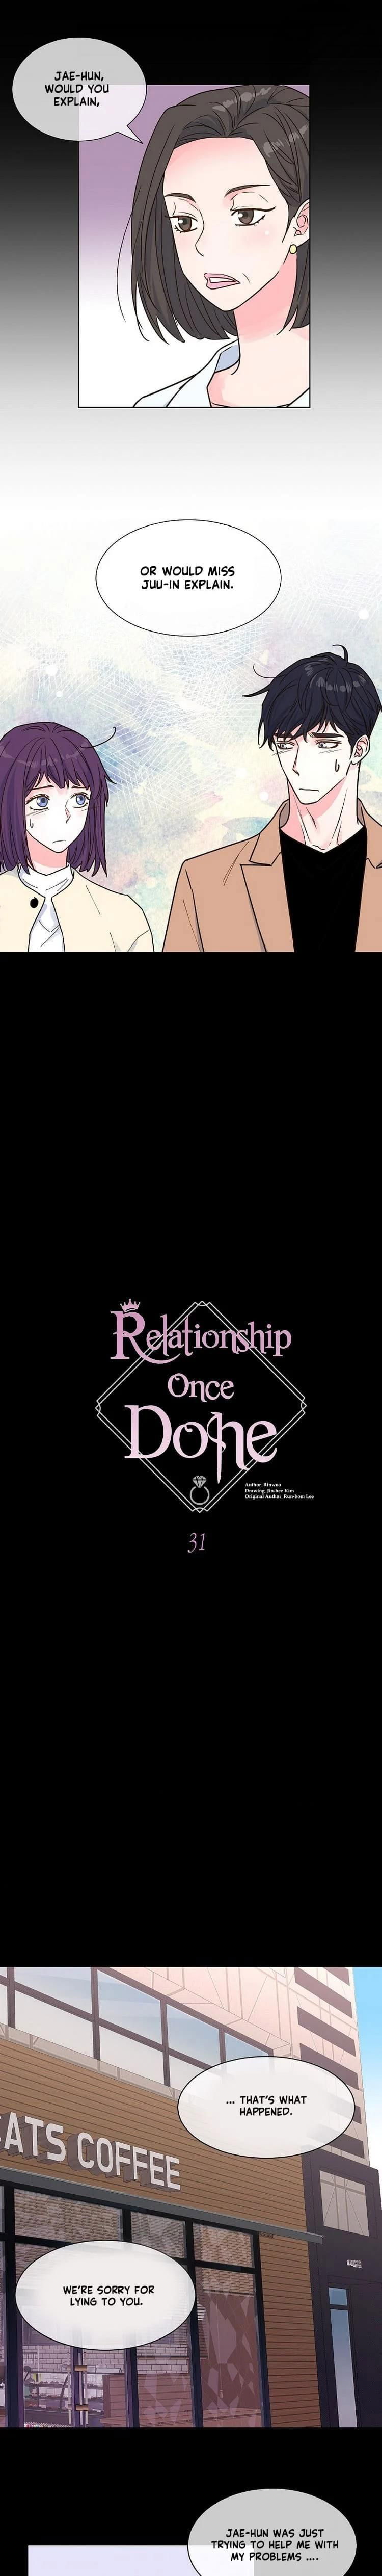 Relationship Once Done Chapter 31 page 1